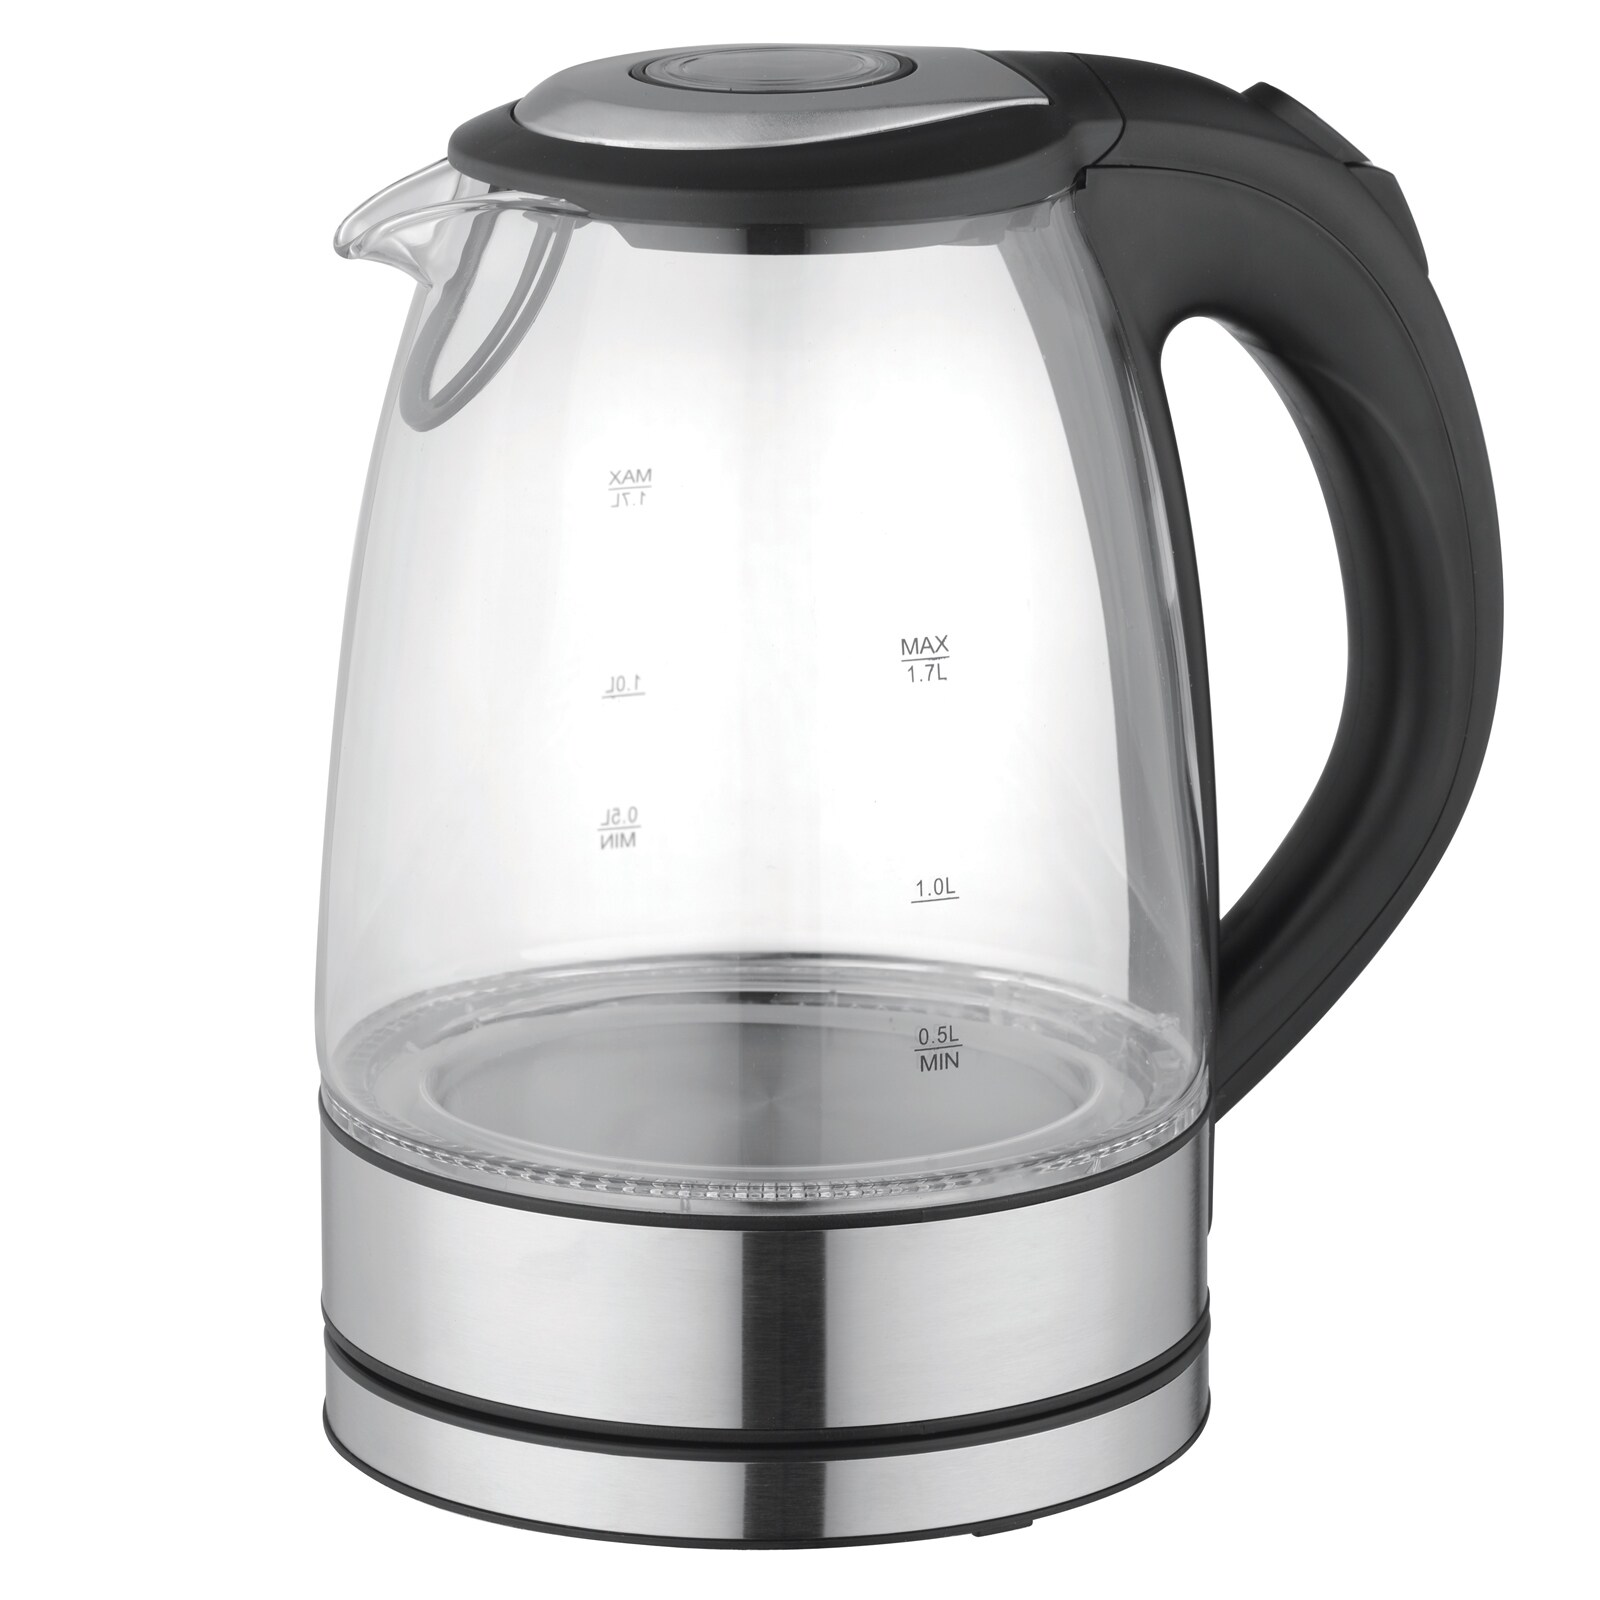 https://ak1.ostkcdn.com/images/products/13164846/Mega-Chef-1.7-liter-Glass-and-Stainless-Steel-Electric-Tea-Kettle-2aac2ca6-248a-40eb-abe5-e59e86a12c9f.jpg